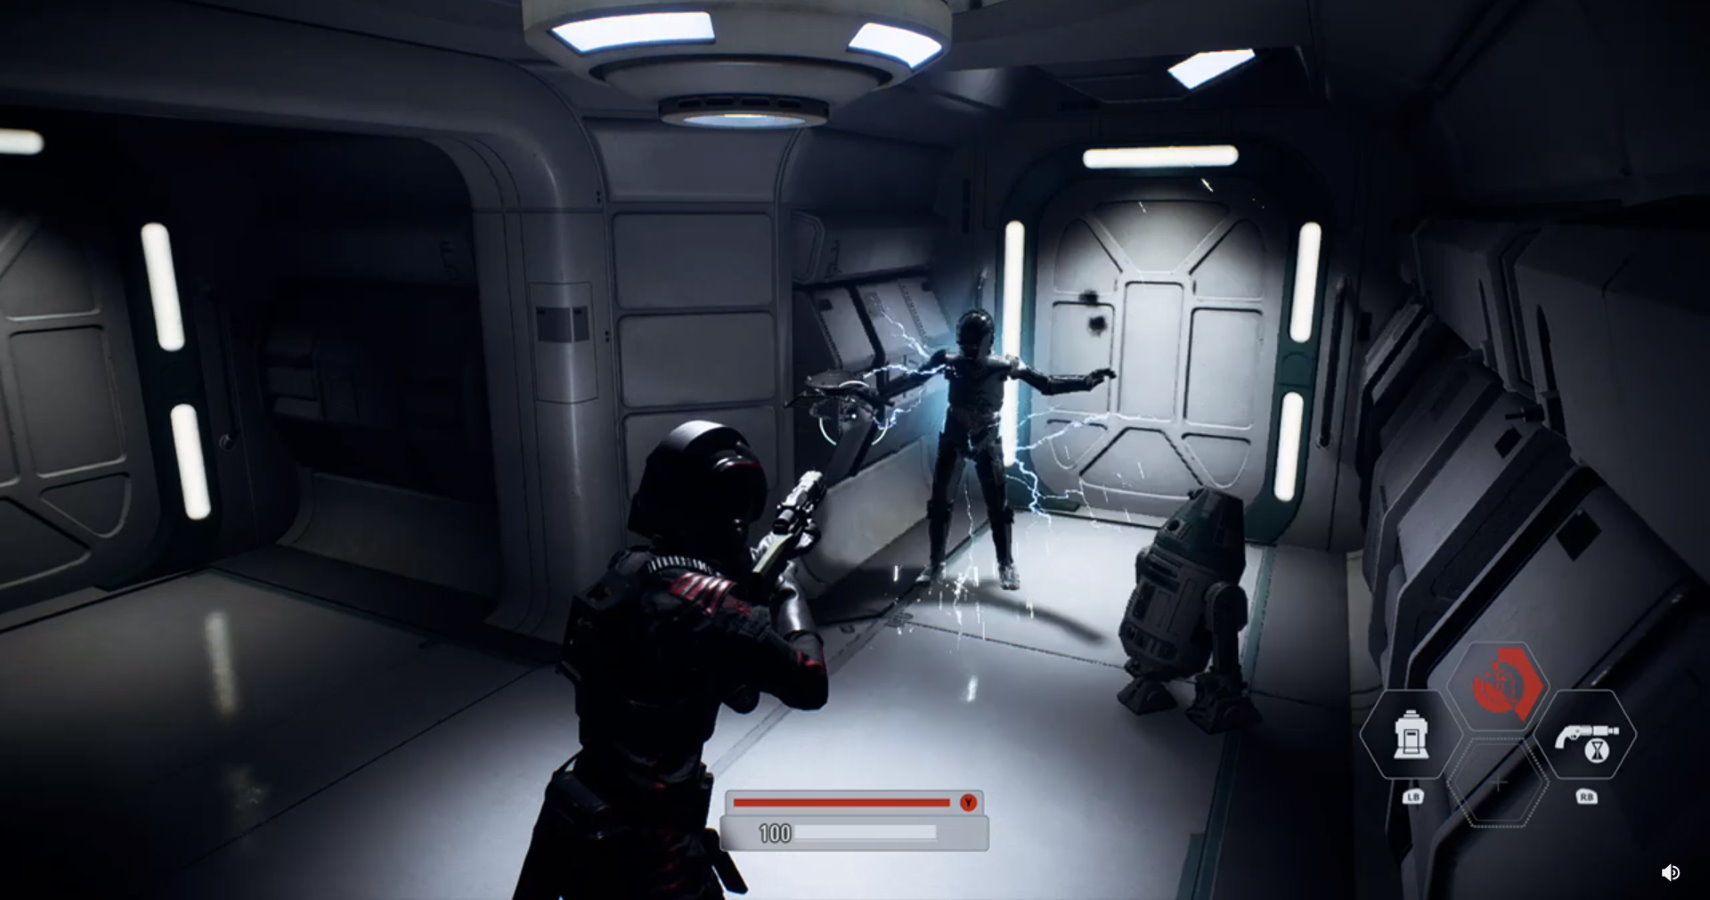 Unlucky Redditor Gets Attacked By Angry Droid With Ability To Spawn Blaster In Battlefront II